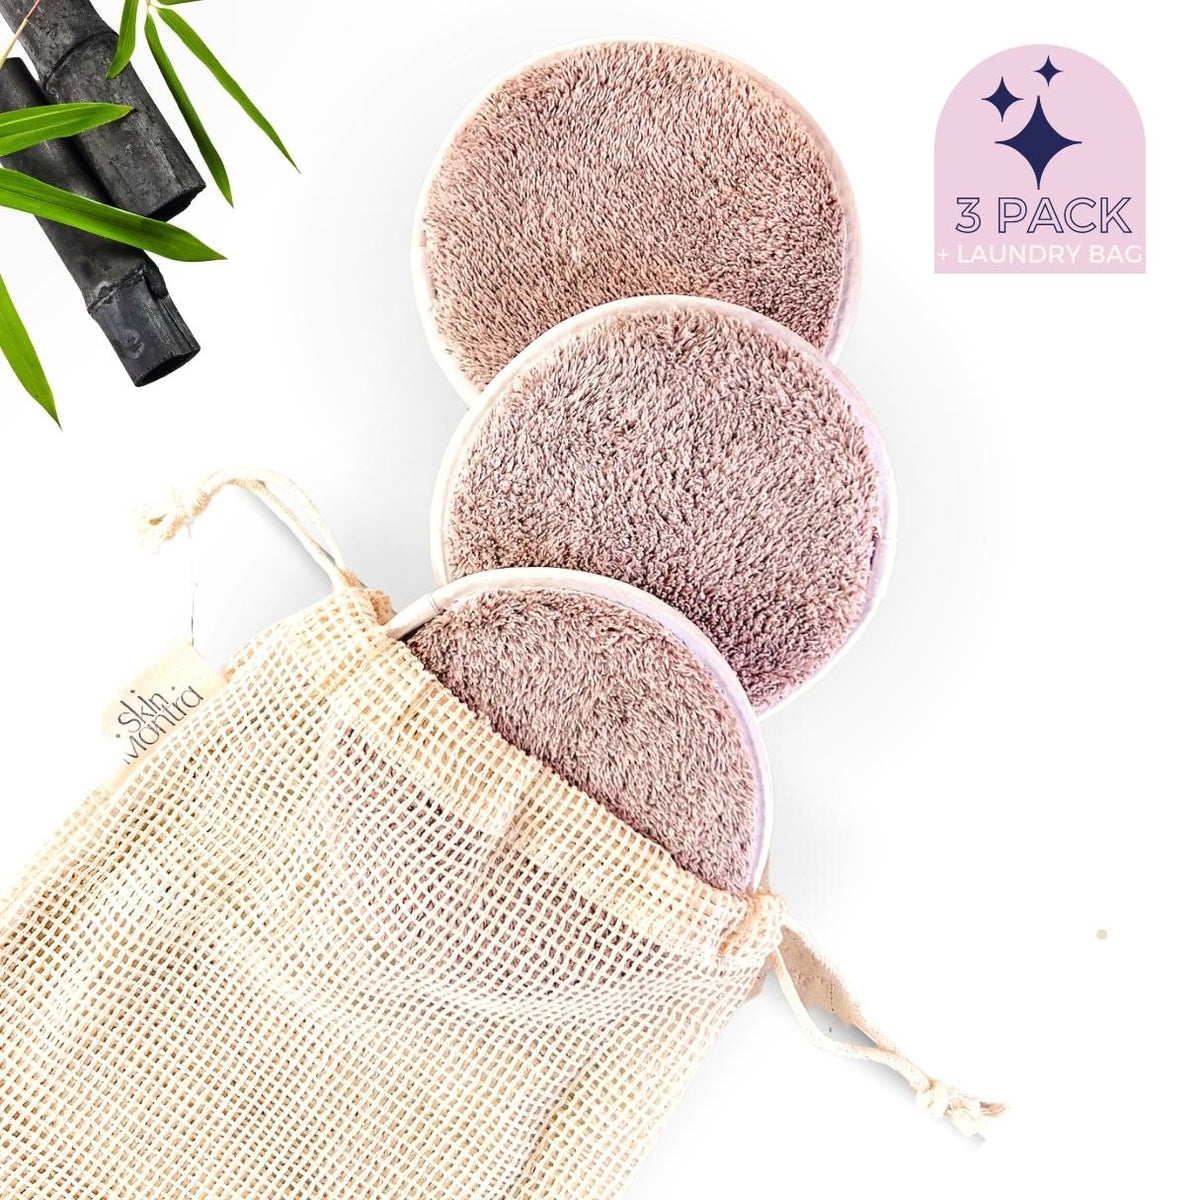 Eco-Friendly Bamboo Charcoal Makeup Remover Pads - Holistic Luxury Skincare by Skin Mantra